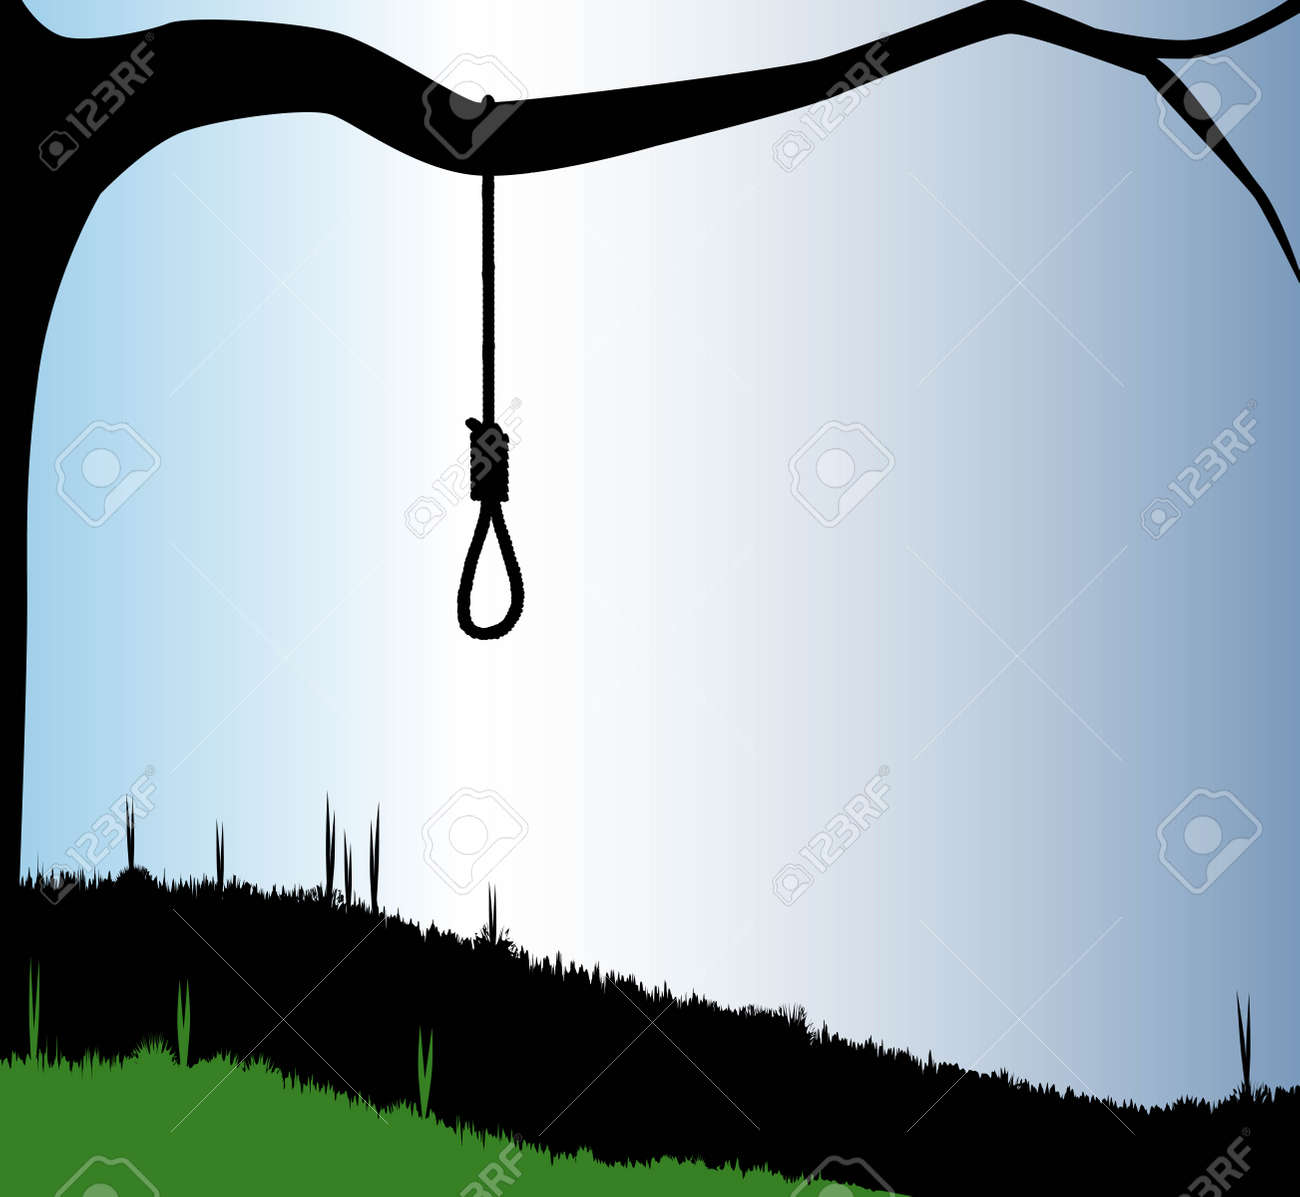 36164135-A-hangmans-noose-tied-to-the-branch-of-a-tree-in-silhouette--Stock-Vector.jpg